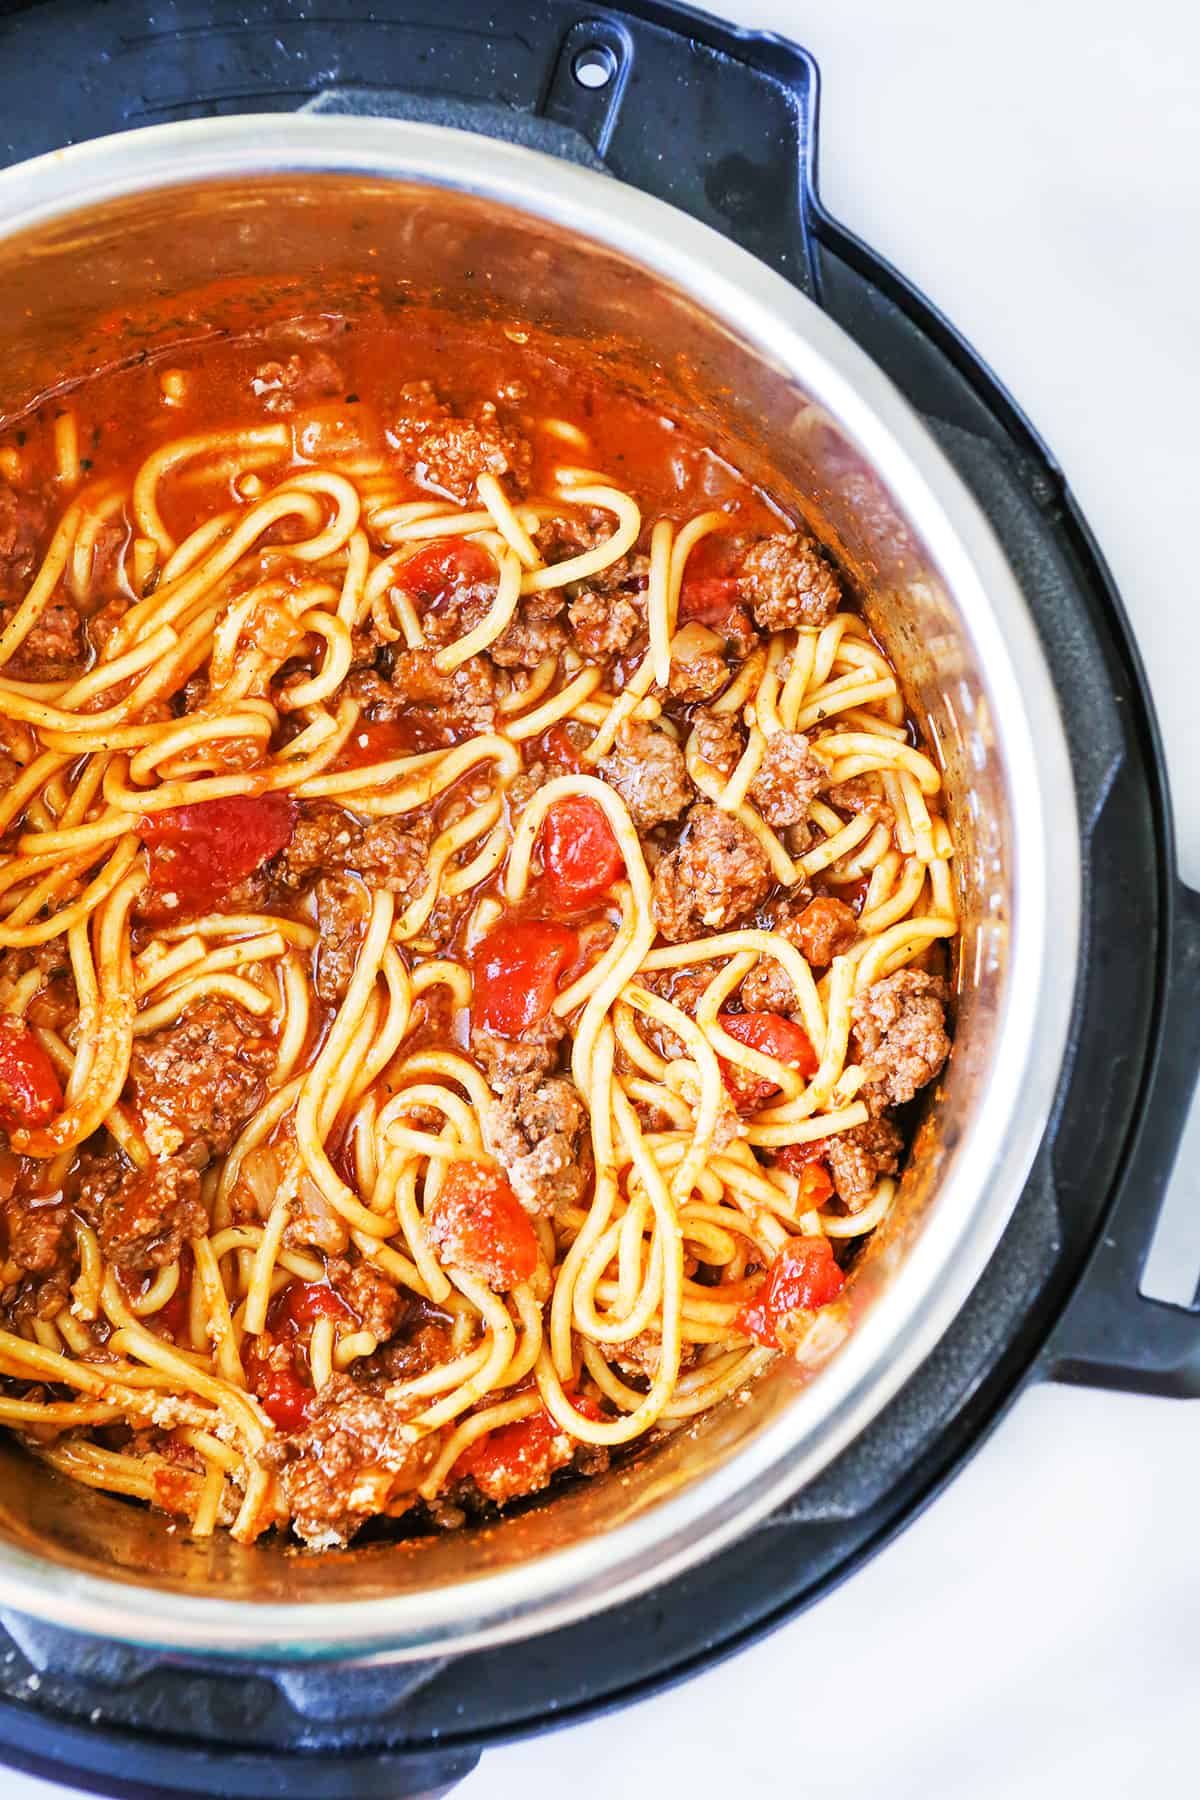 Top view of Instant Pot full of cooked spaghetti 